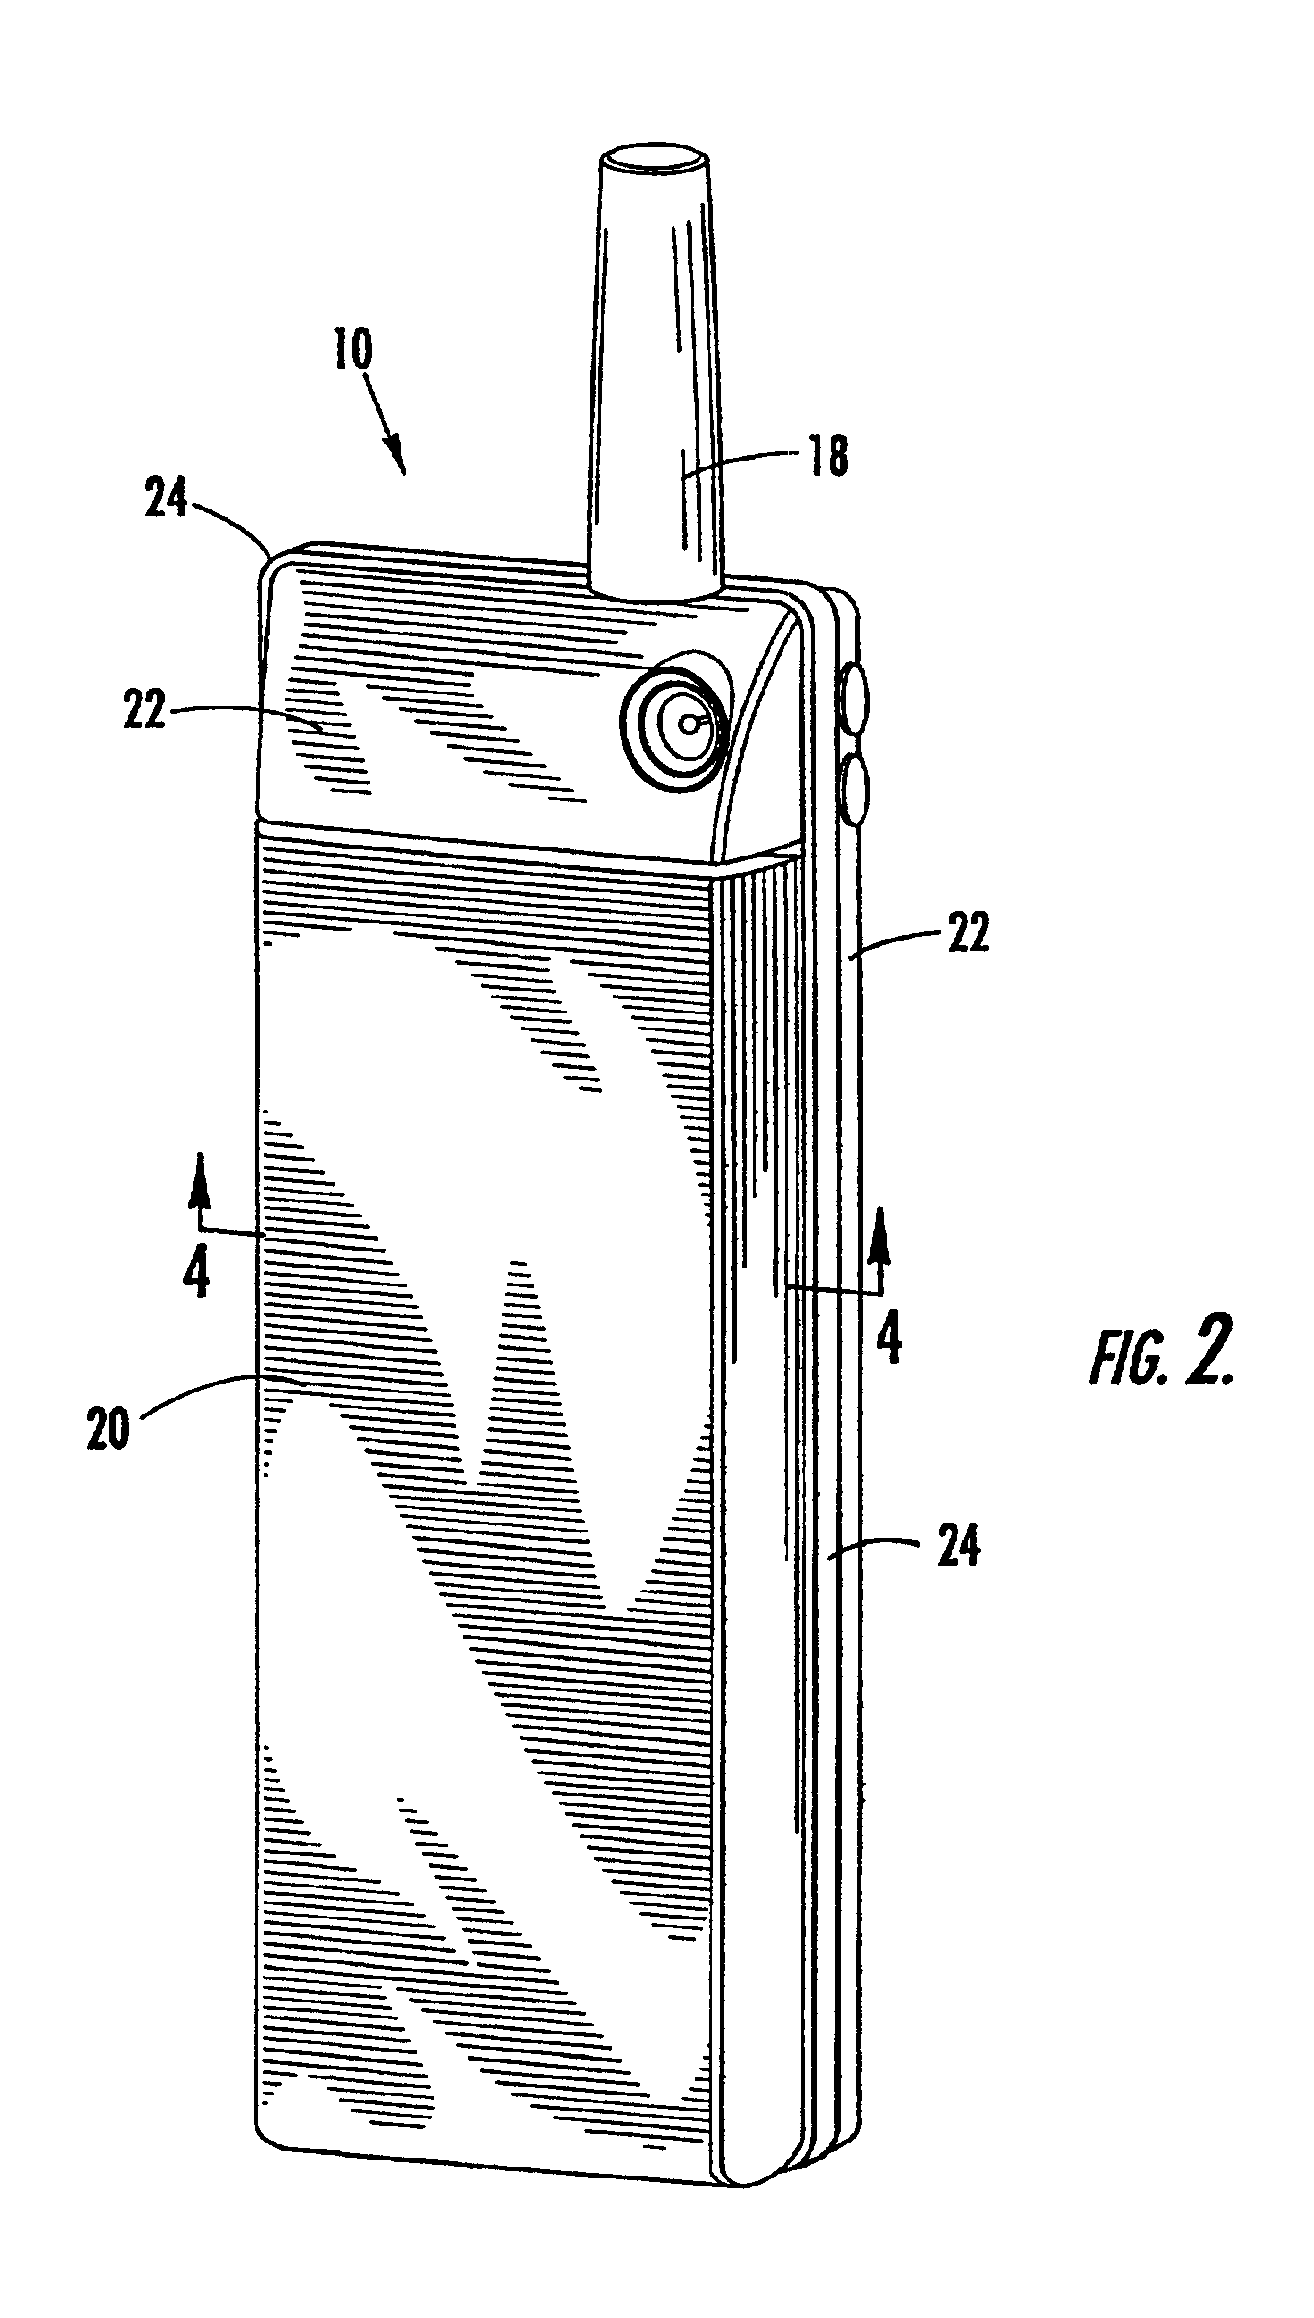 Method of manufacturing a structural frame